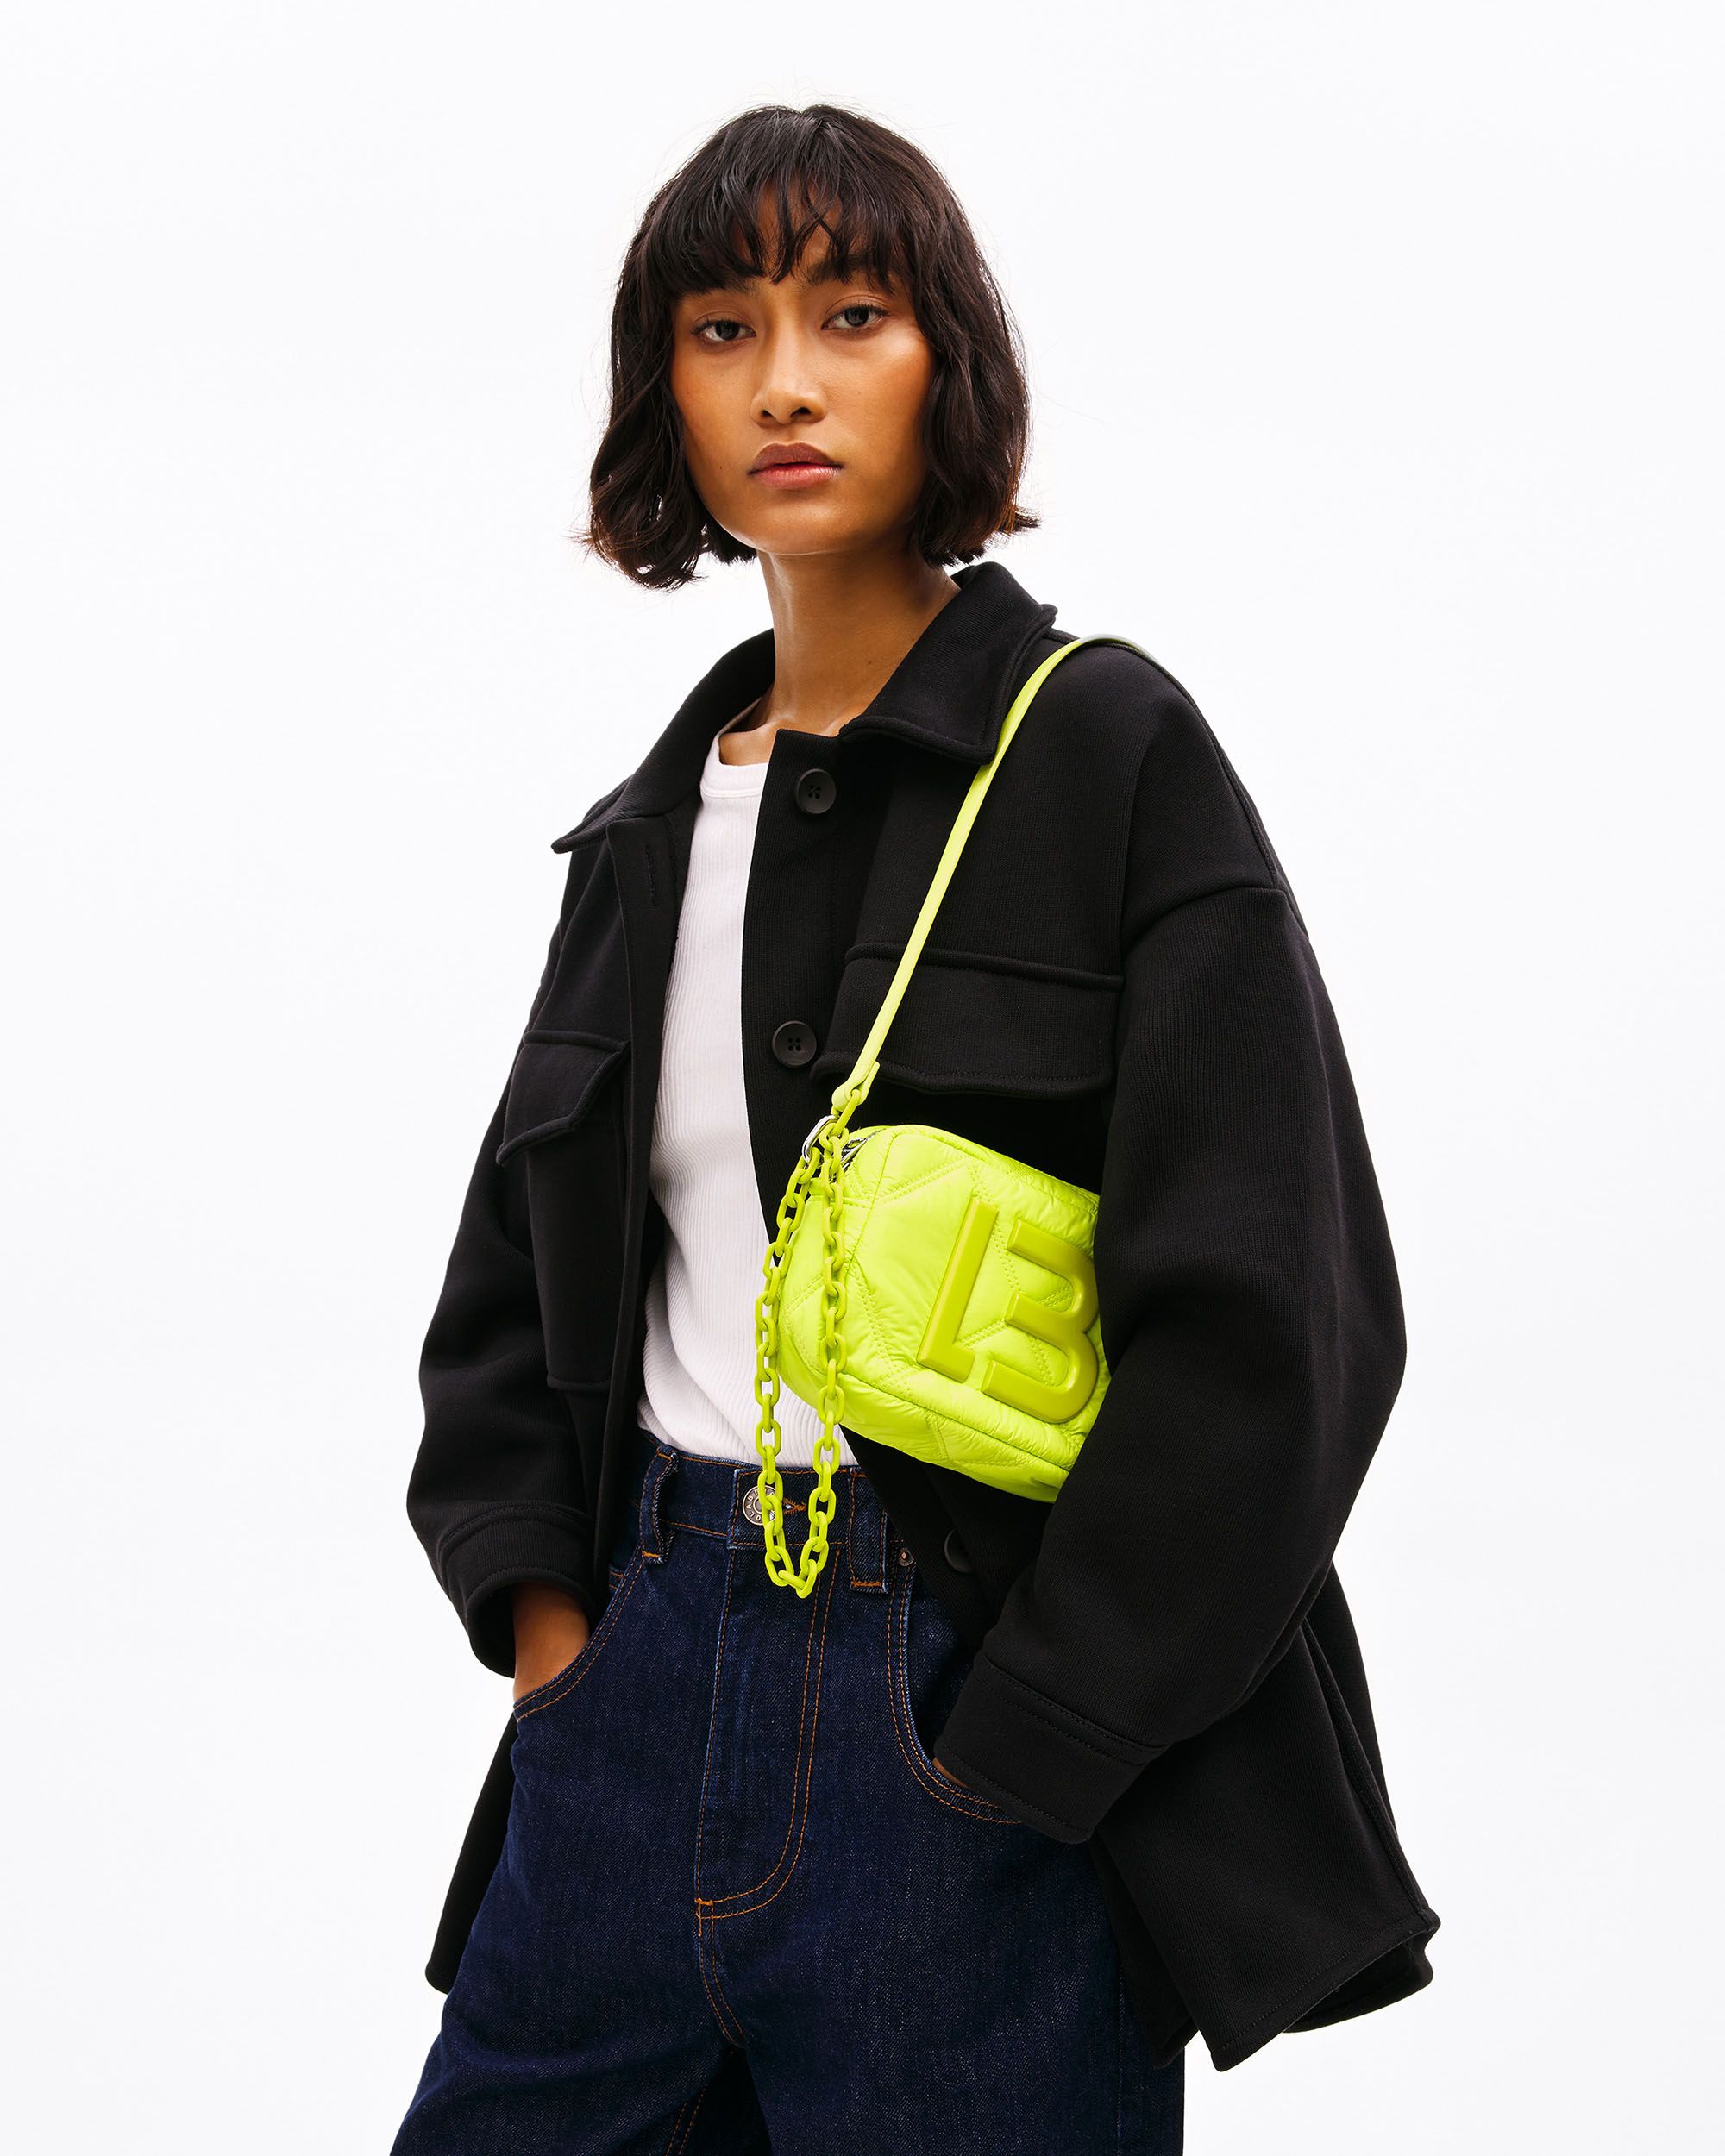 These are the LB bags by BIMBA Y LOLA by Rottingdean Bazaar